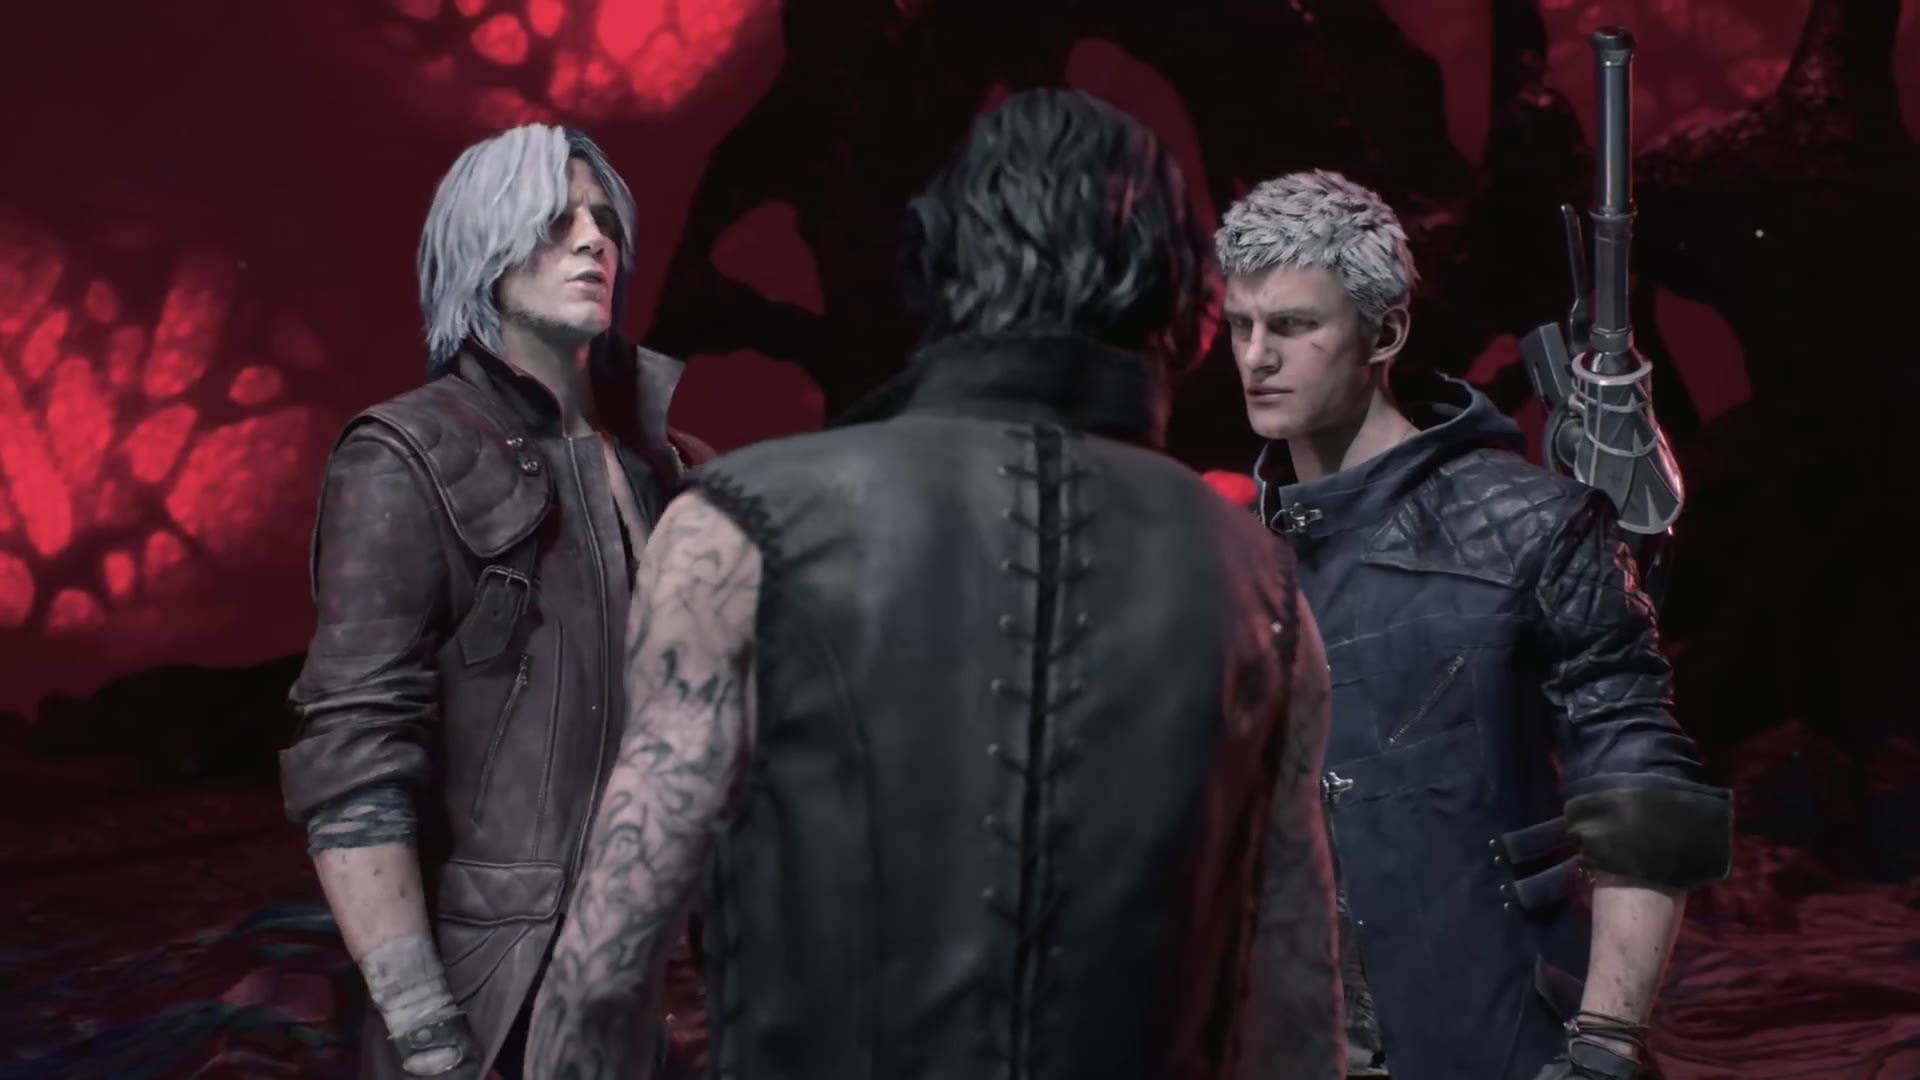 Dante gameplay shown off in new Devil May Cry 5 trailer